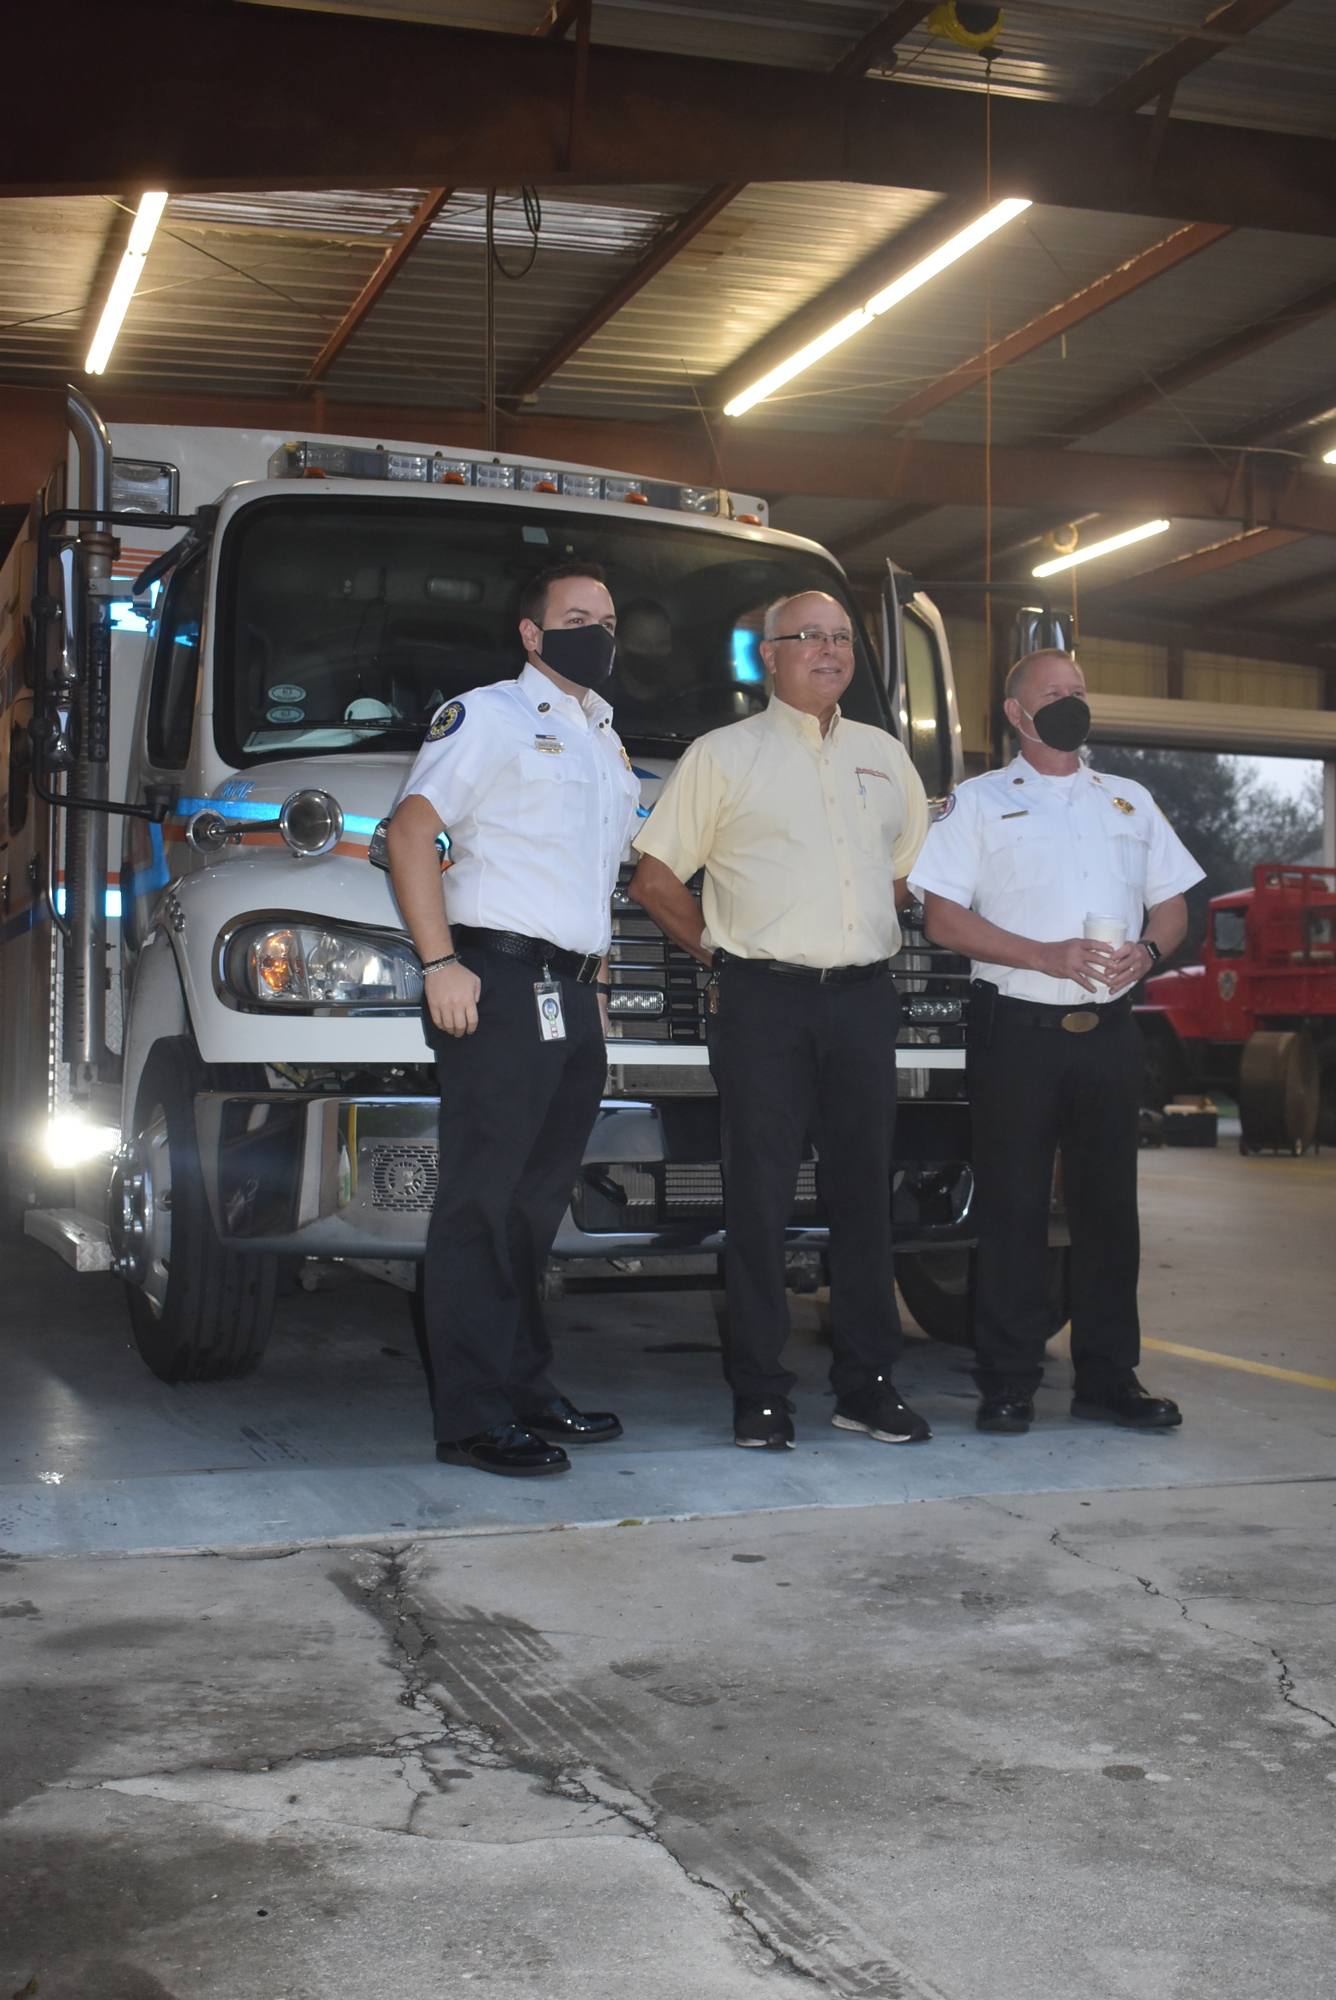 (From left) Manatee County EMS Chief James Crutchfield, Myakka fire chief Daniel Cacchiotti and East Manatee fire chief Lee Whitehurst were among those who addressed the welcome committee.